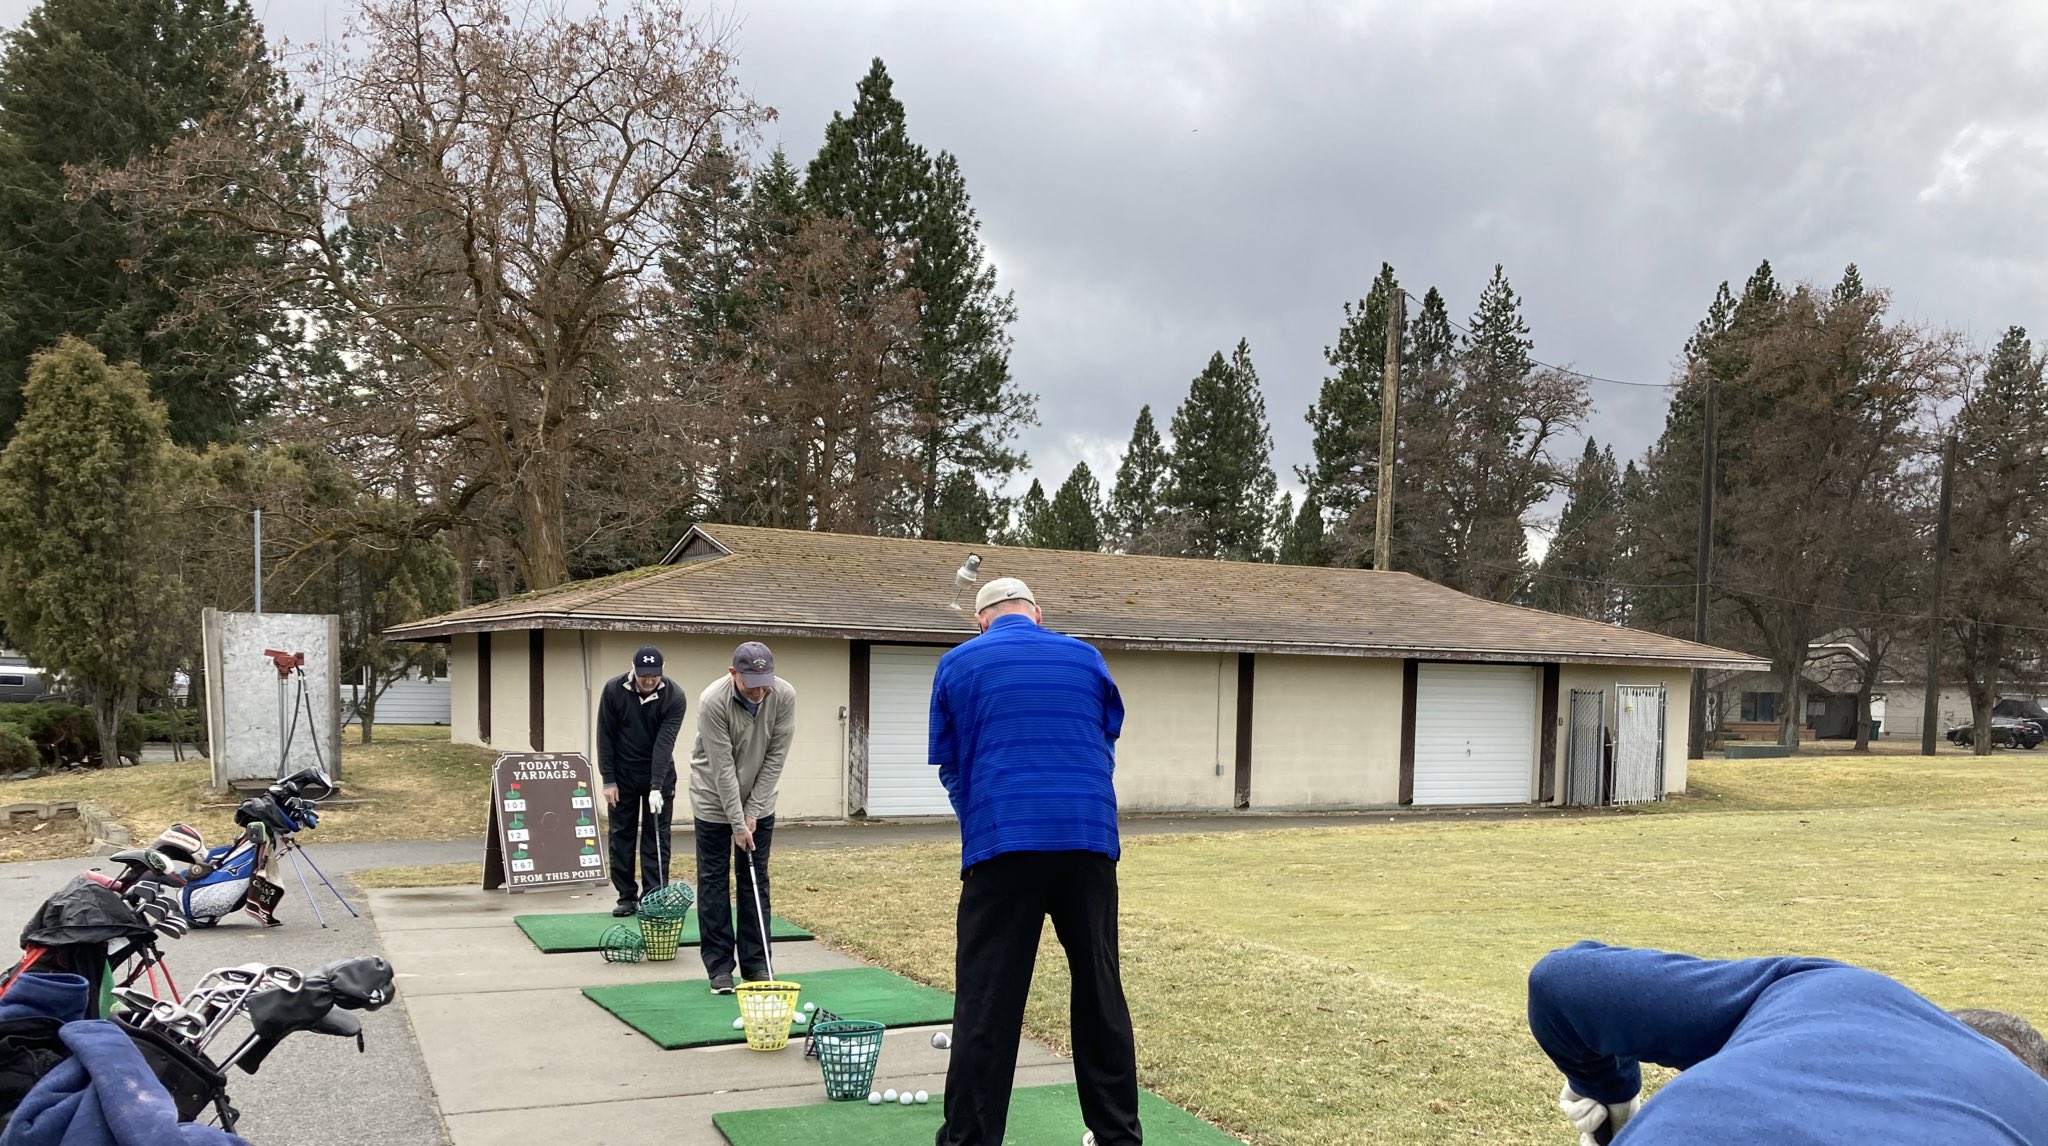 Spokane Co. golf courses are reopening with COVID security measures